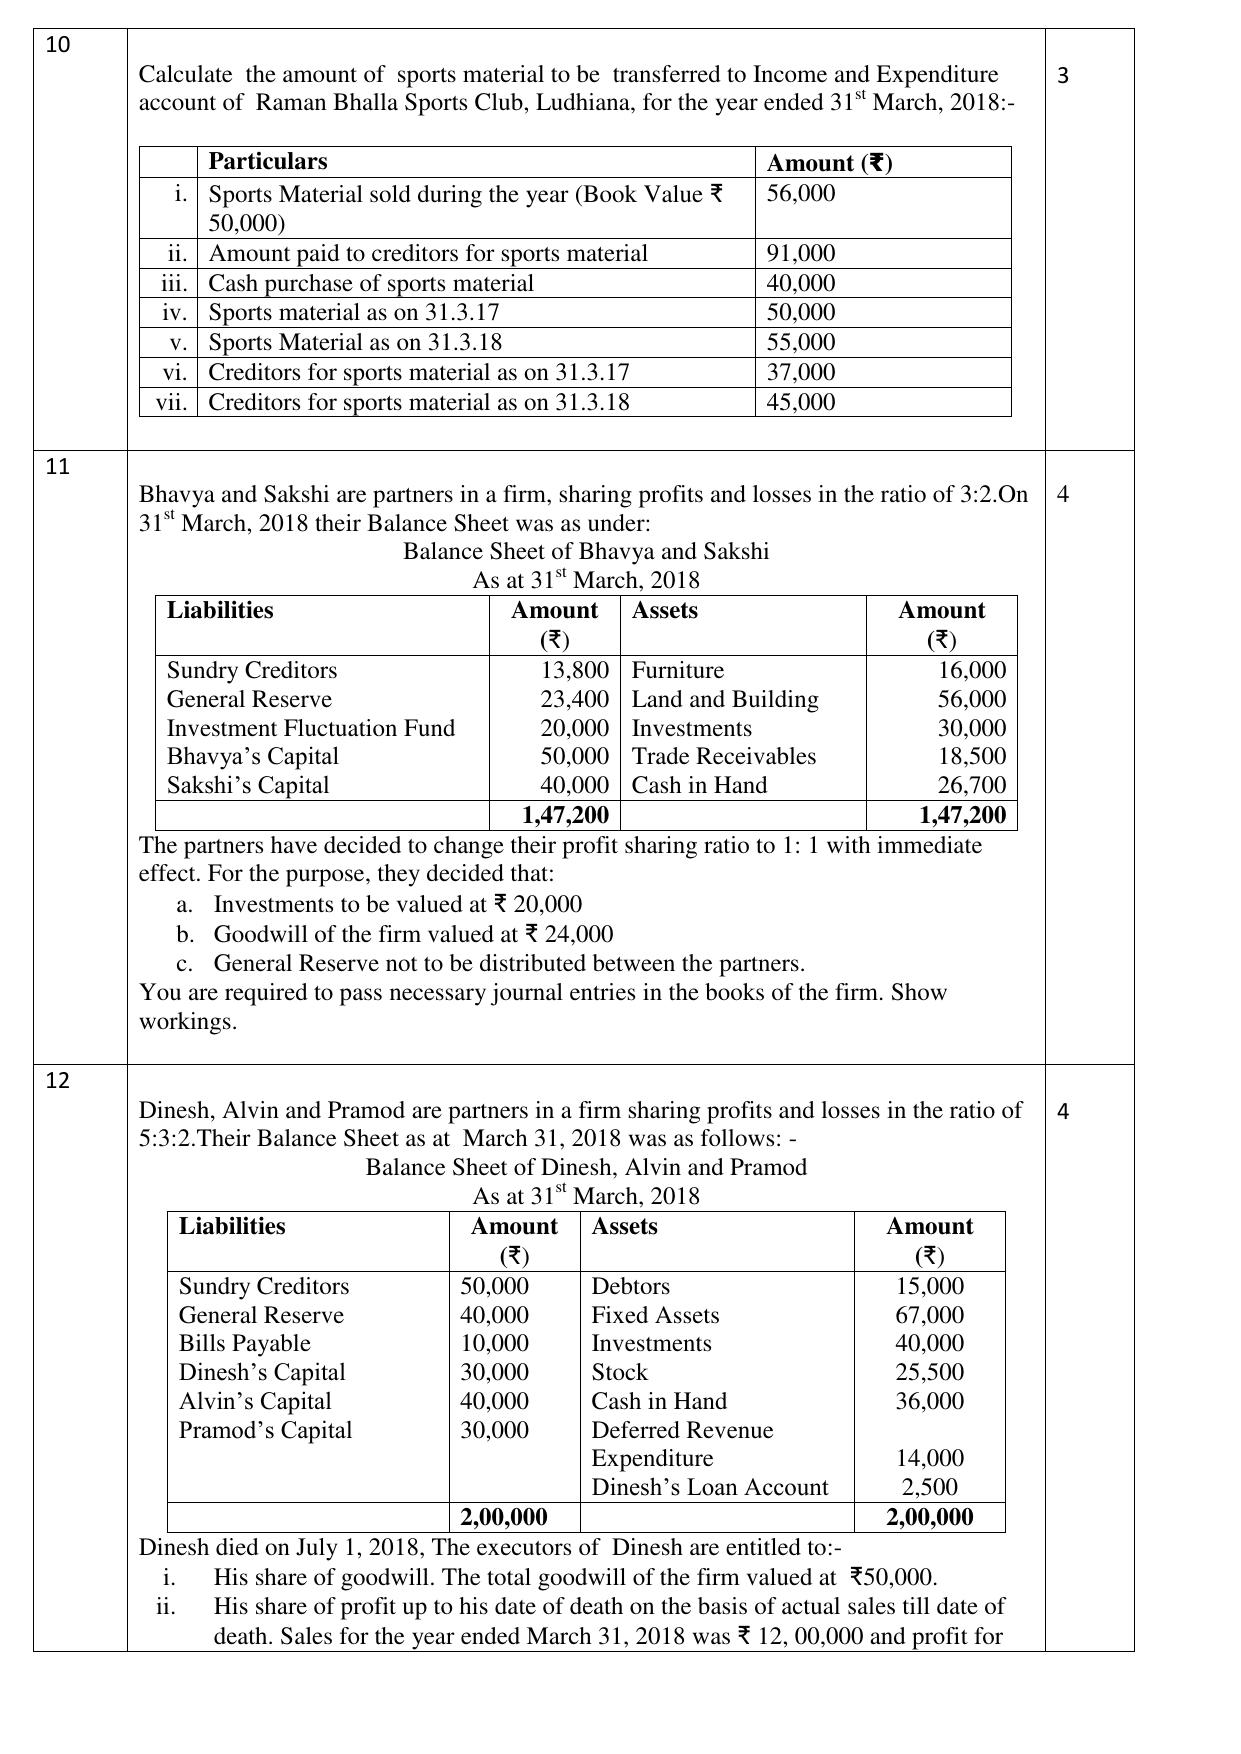 CBSE Class 12 Accountancy-Sample Paper 2018-19 - Page 3